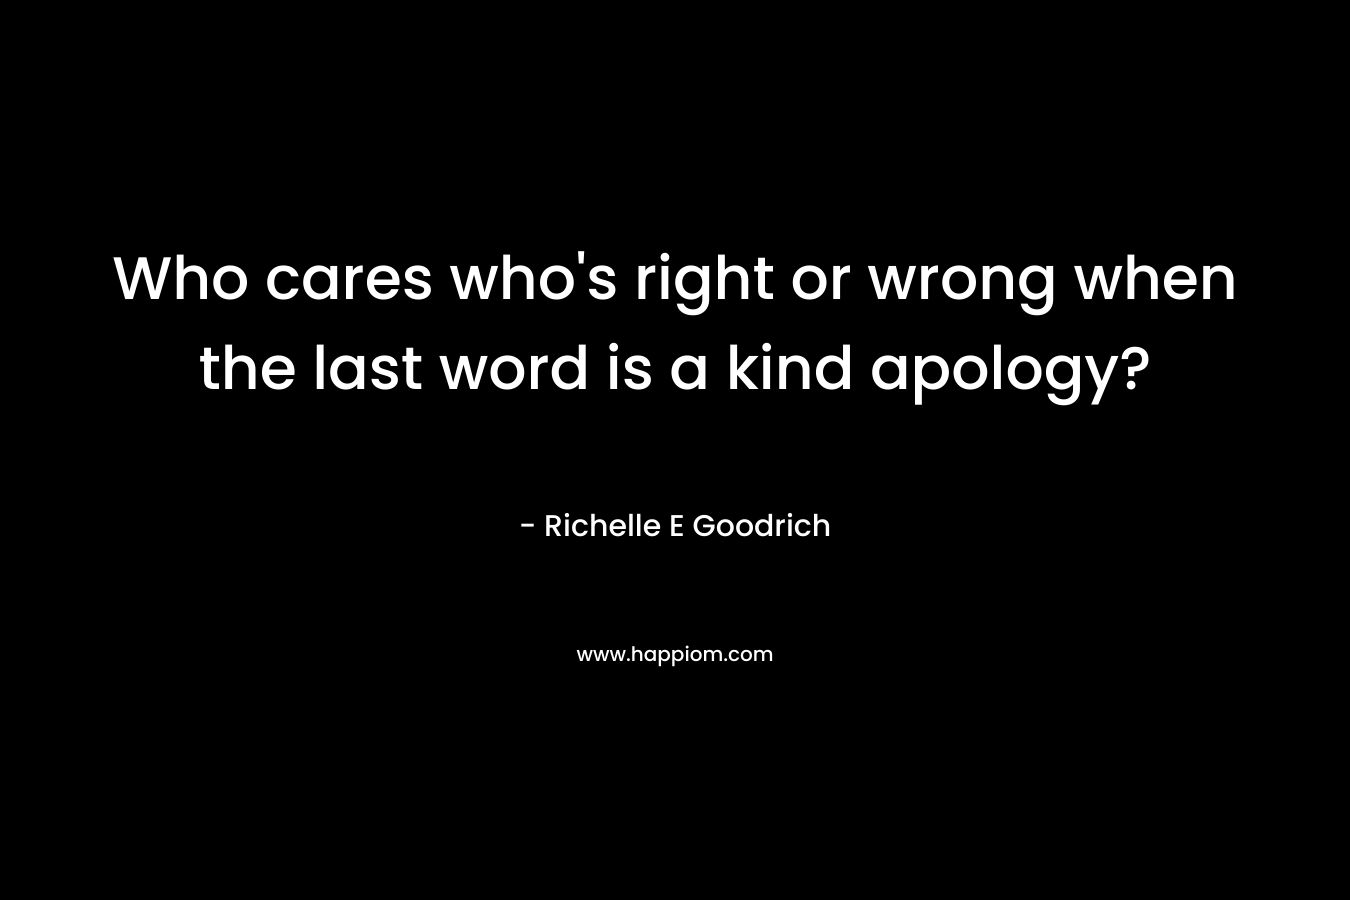 Who cares who’s right or wrong when the last word is a kind apology? – Richelle E Goodrich